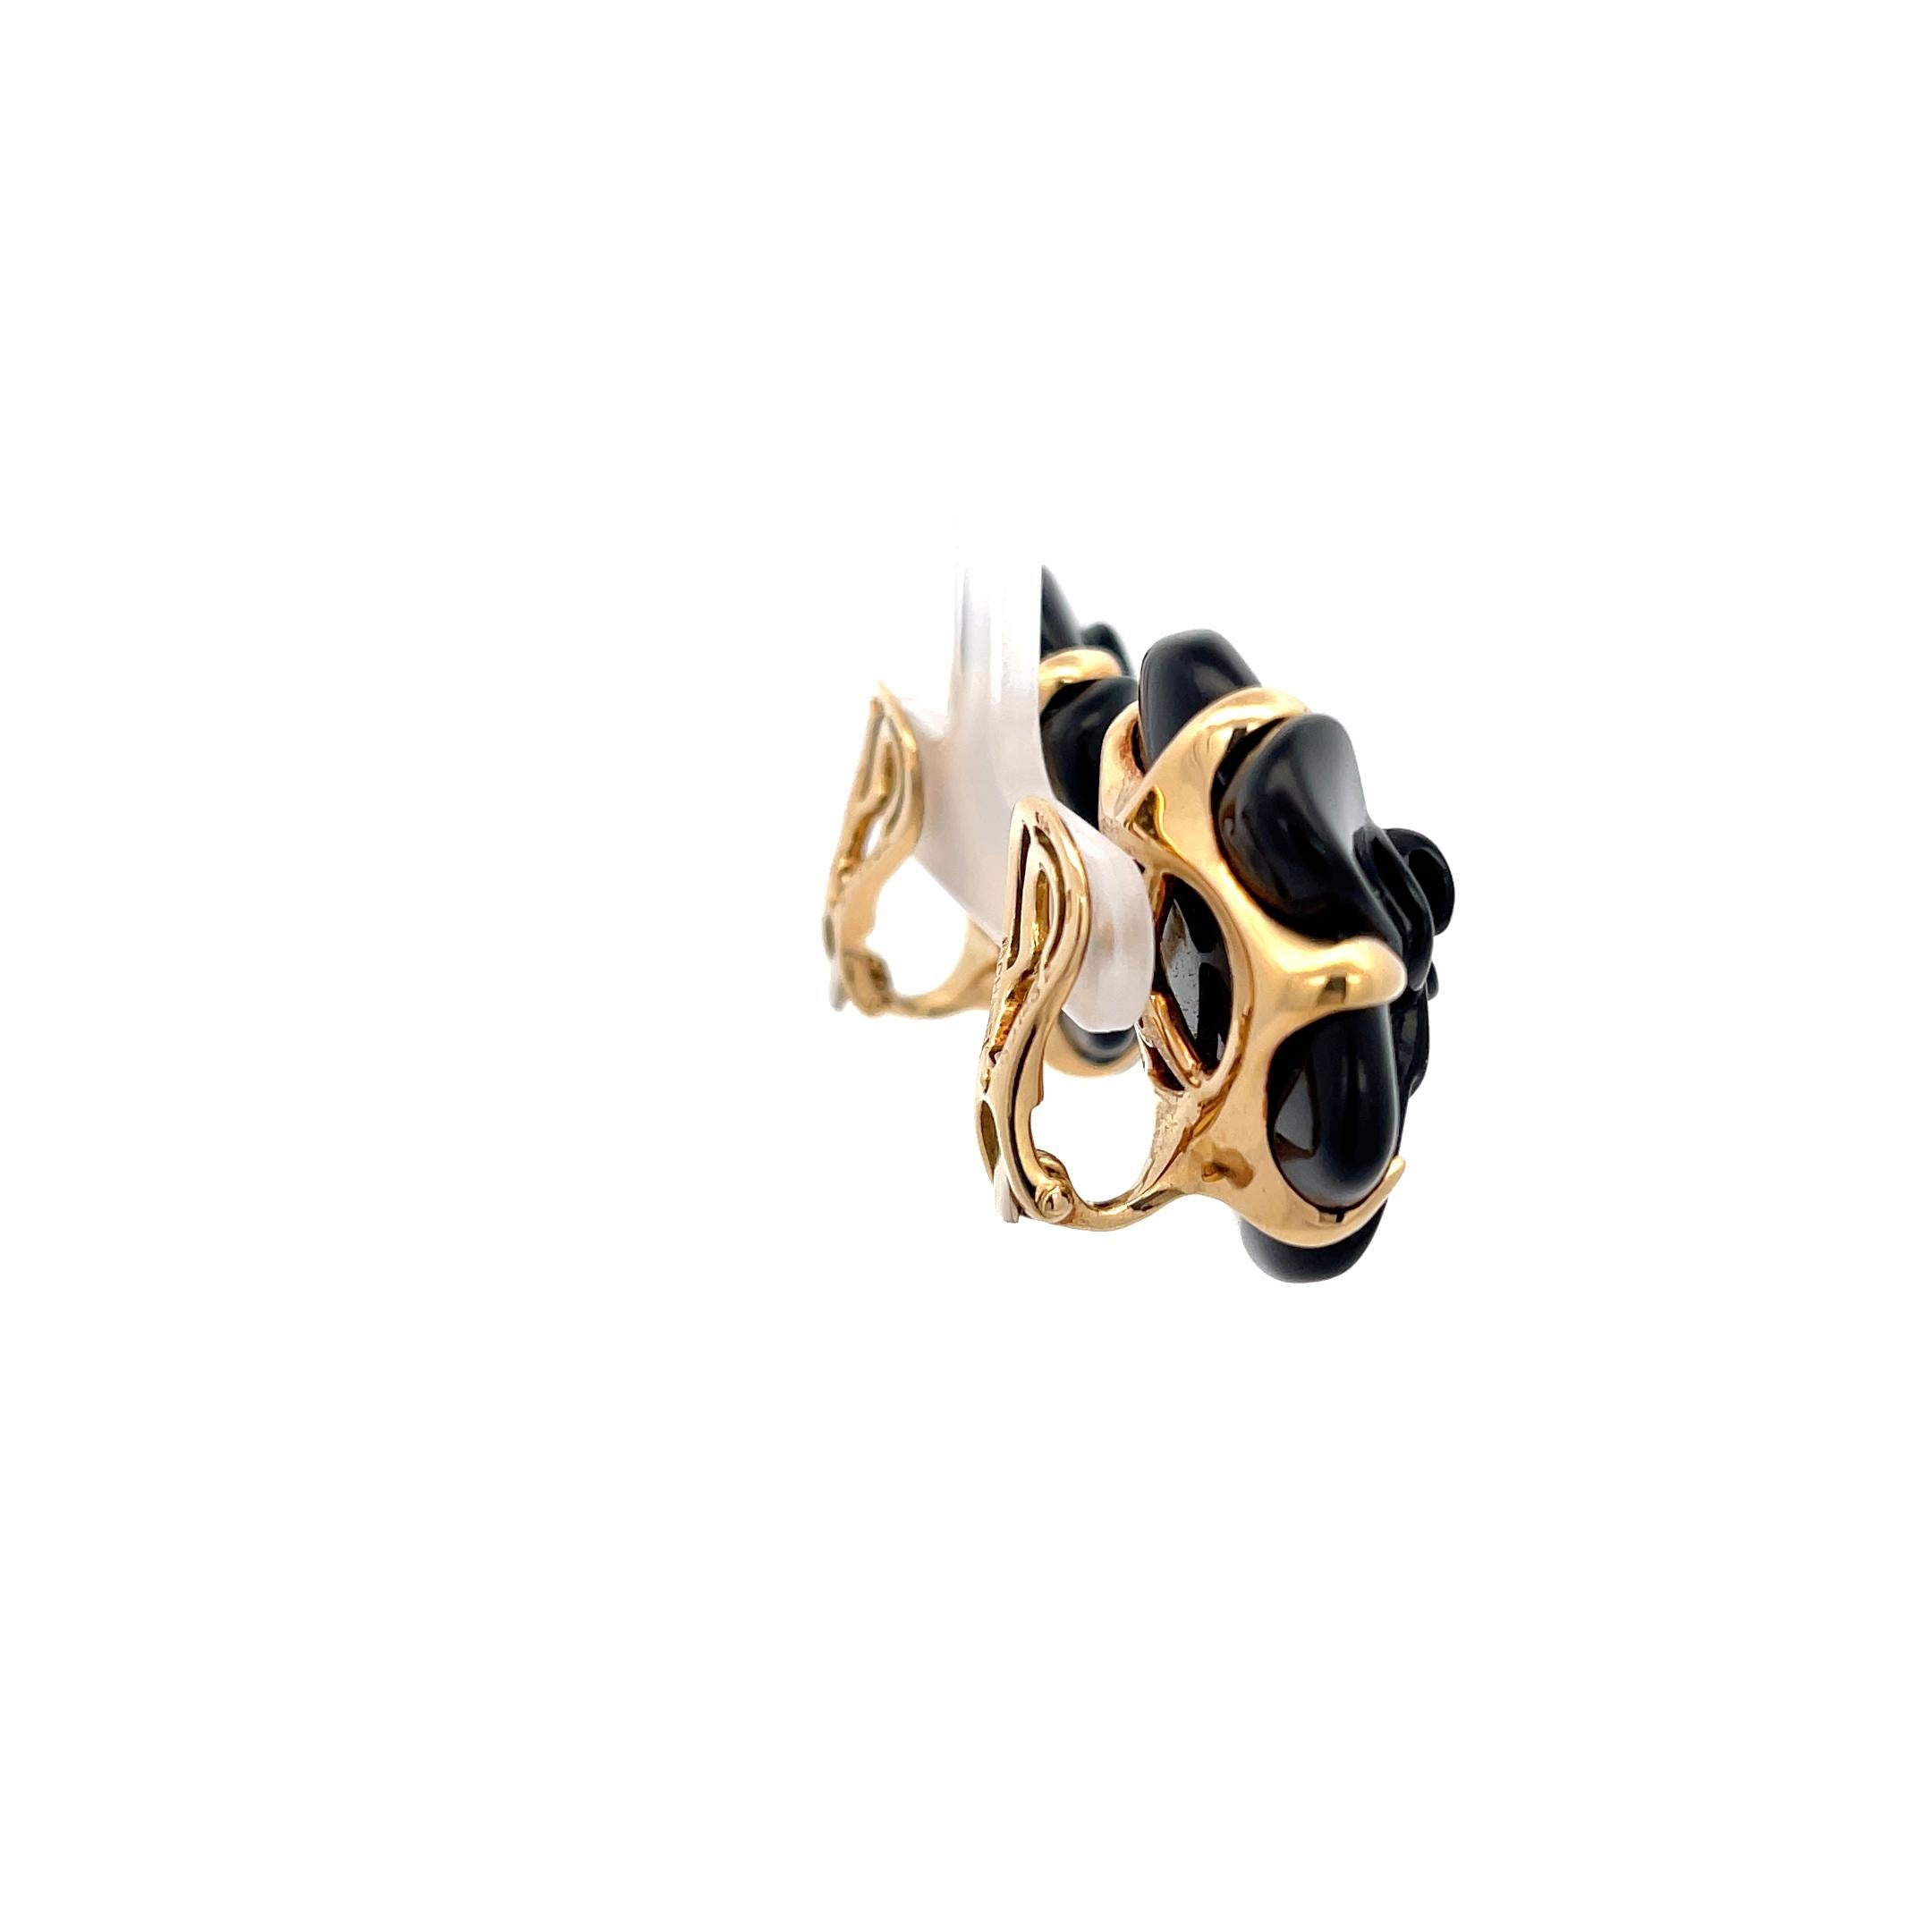 Mixed Cut Estate Chanel Camelia Black Agate Earrings 18K Yellow Gold